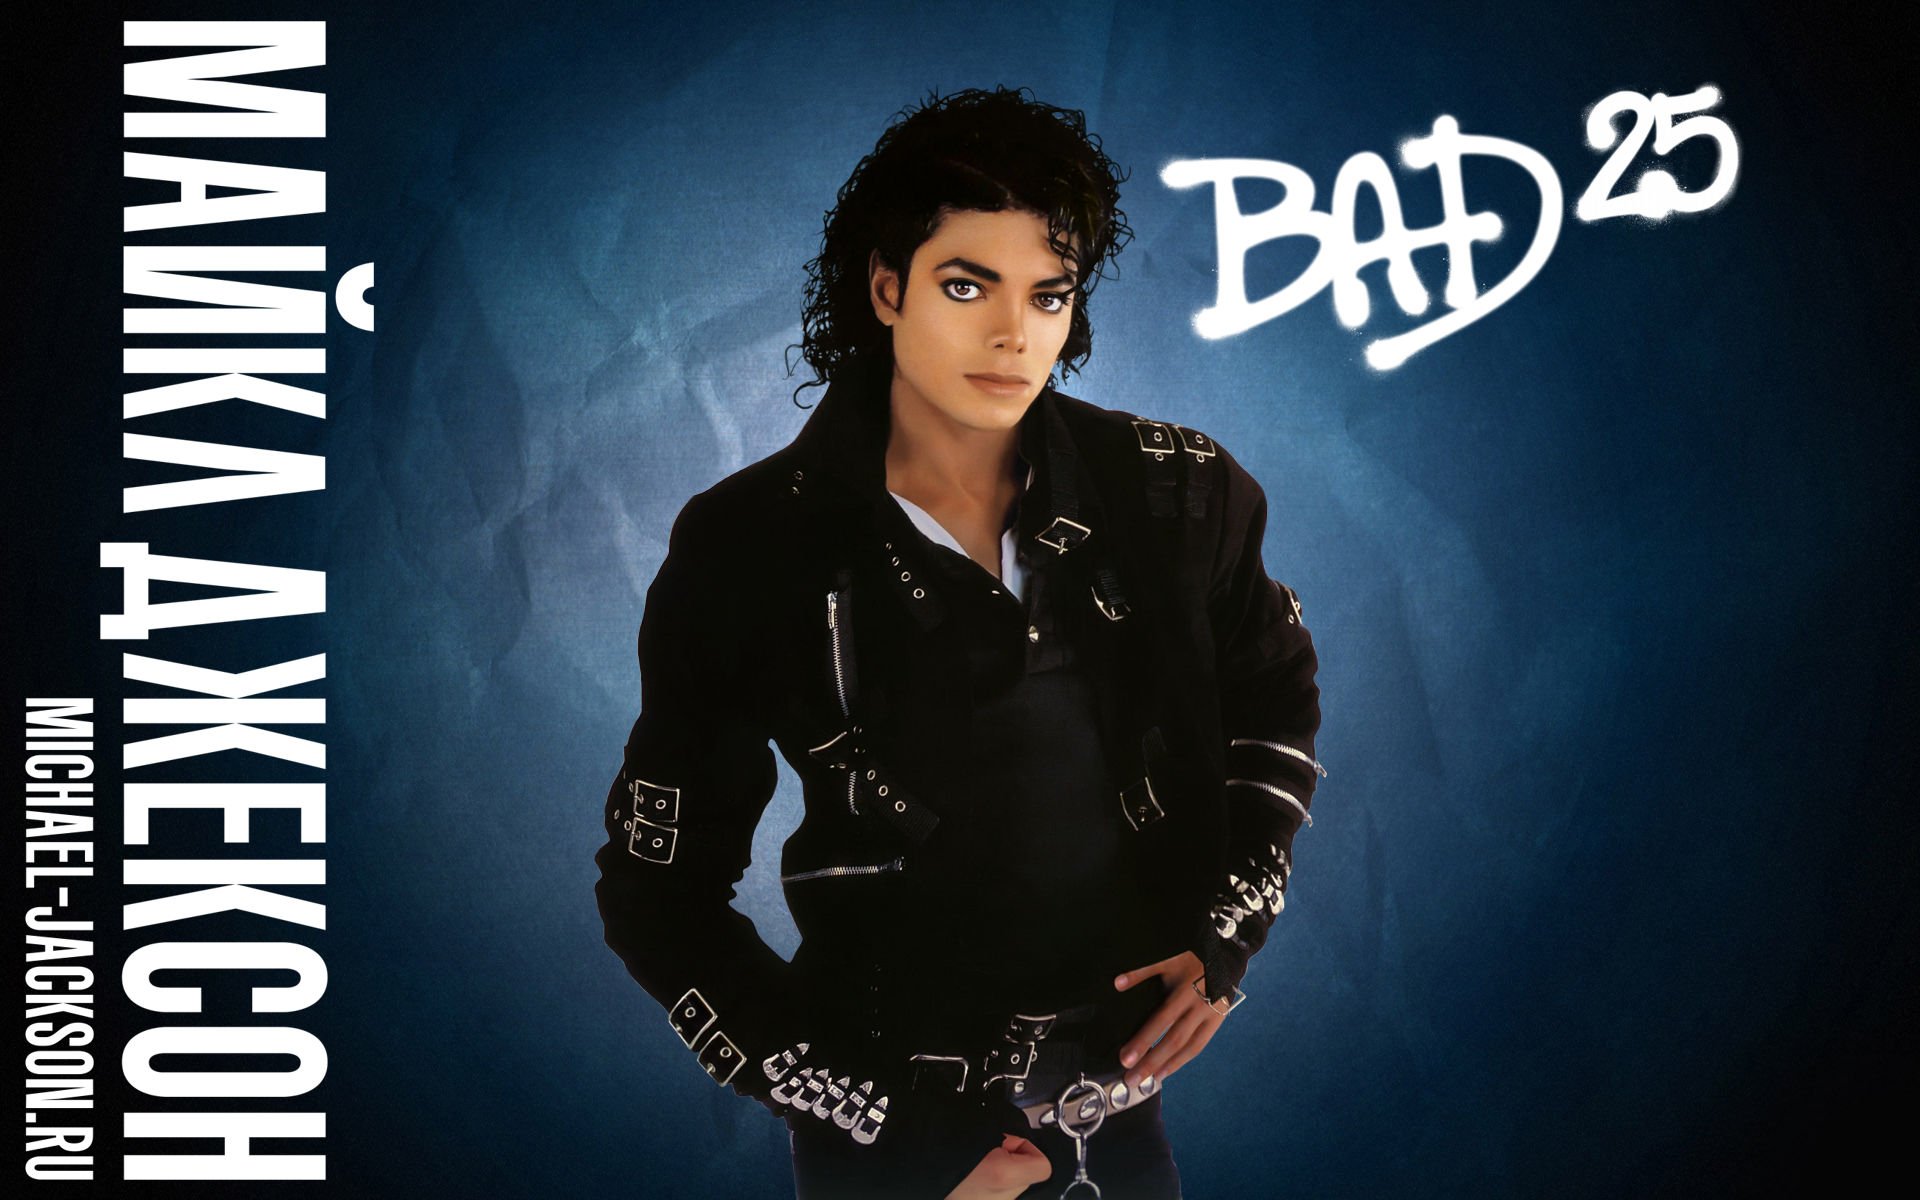 michael jackson list of unreleased songs mp3 free download